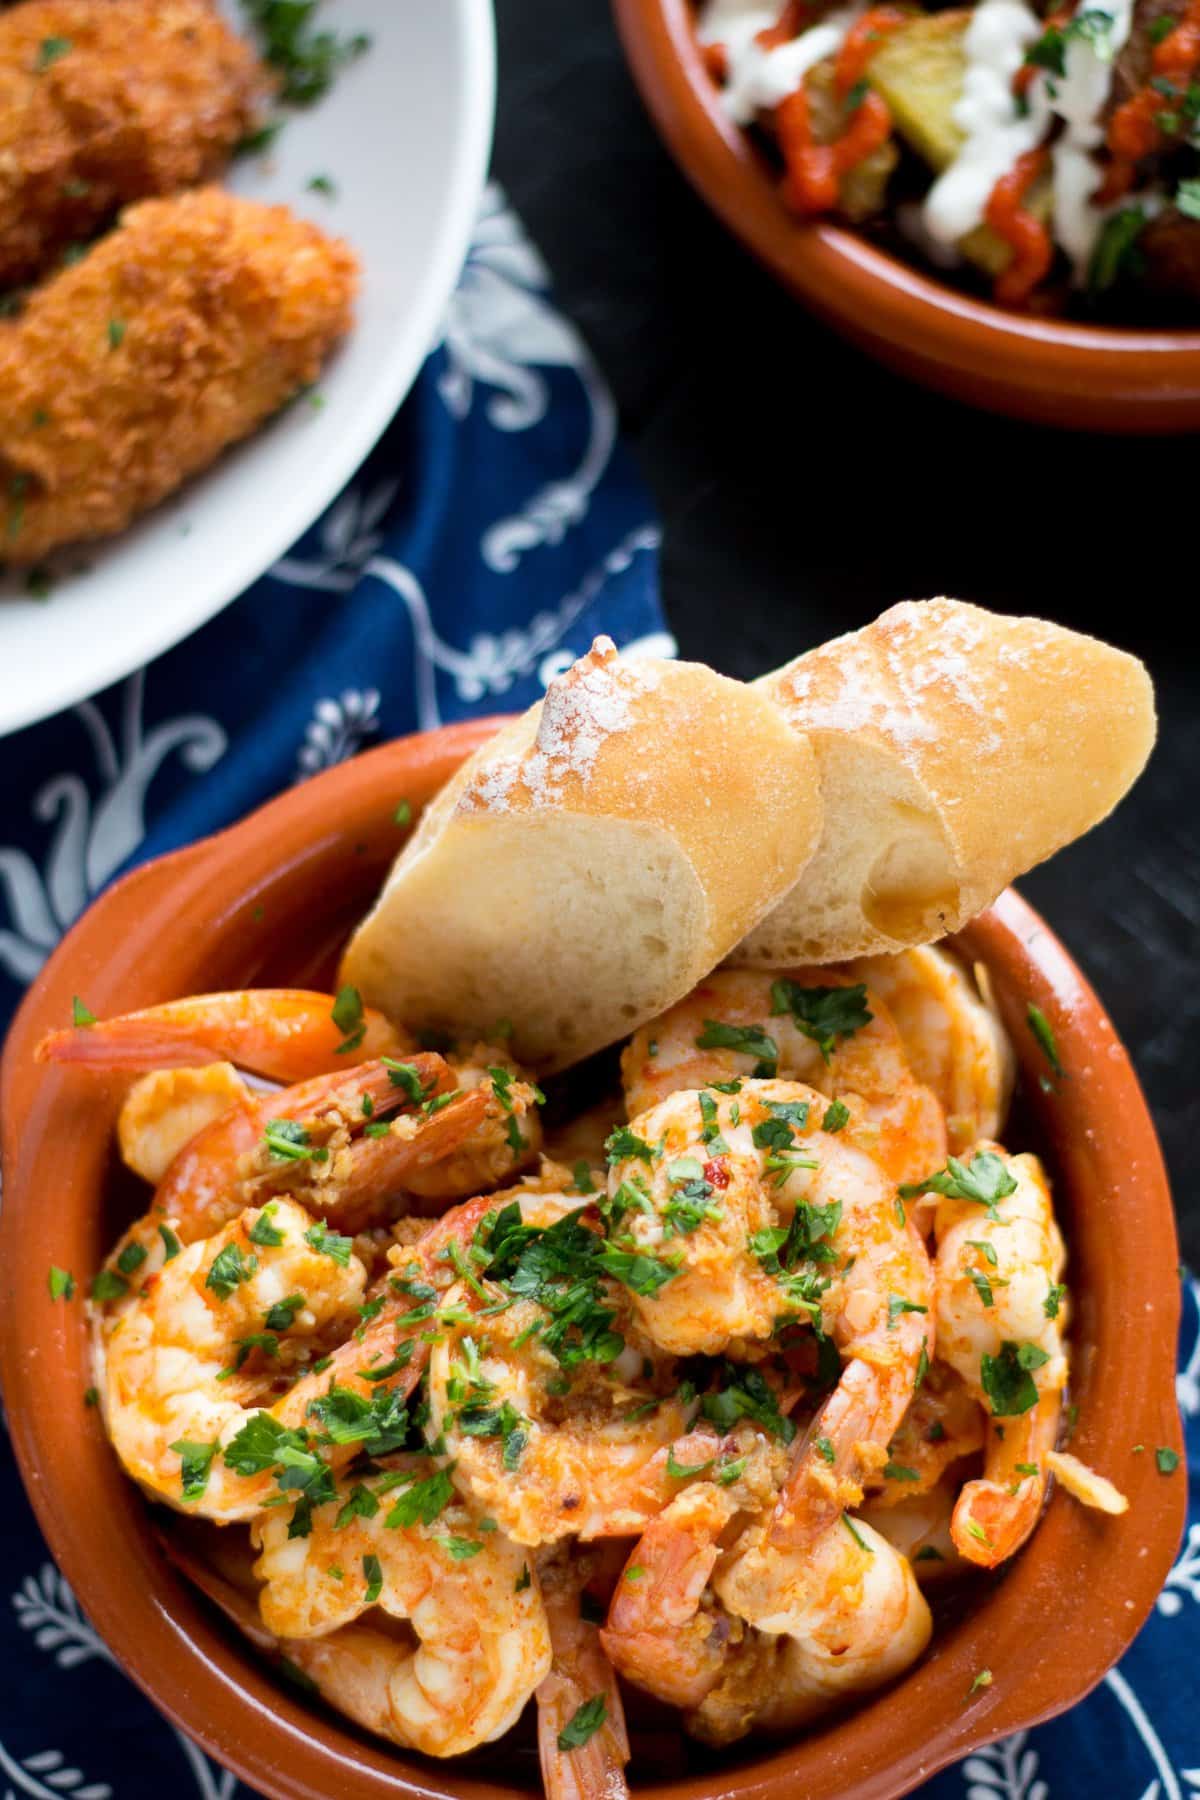 Garlic Shrimp (Gambas al Ajillo) are a classic Spanish tapas dish. Succulent shrimp in a spicy garlicky sauce that you will need to dip your bread into!